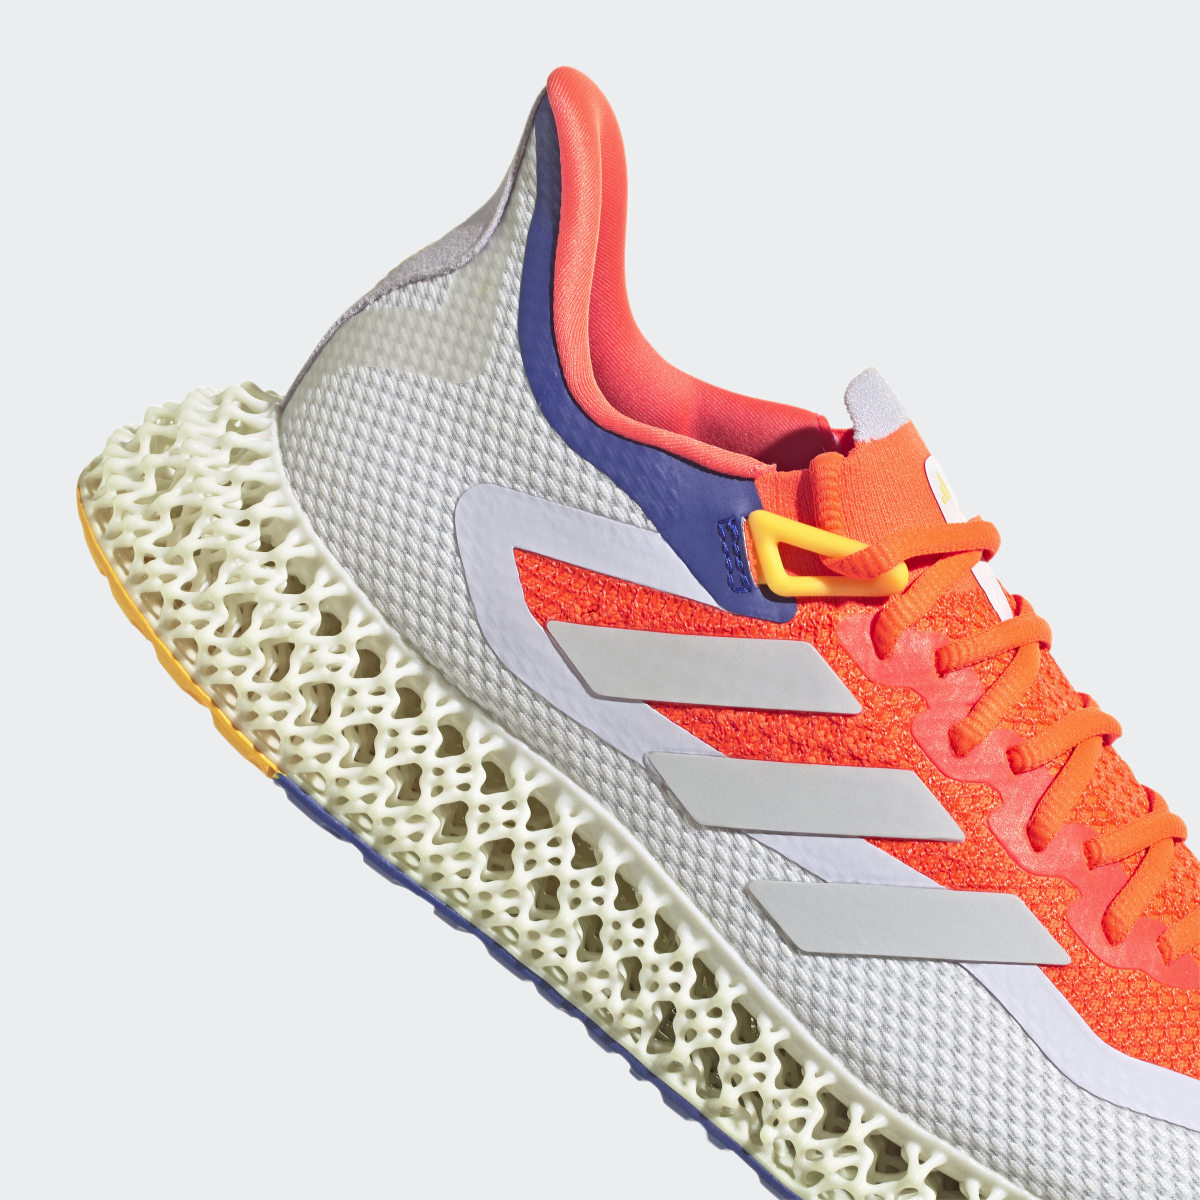 Adidas 4DFWD 2 Running Shoes. 10